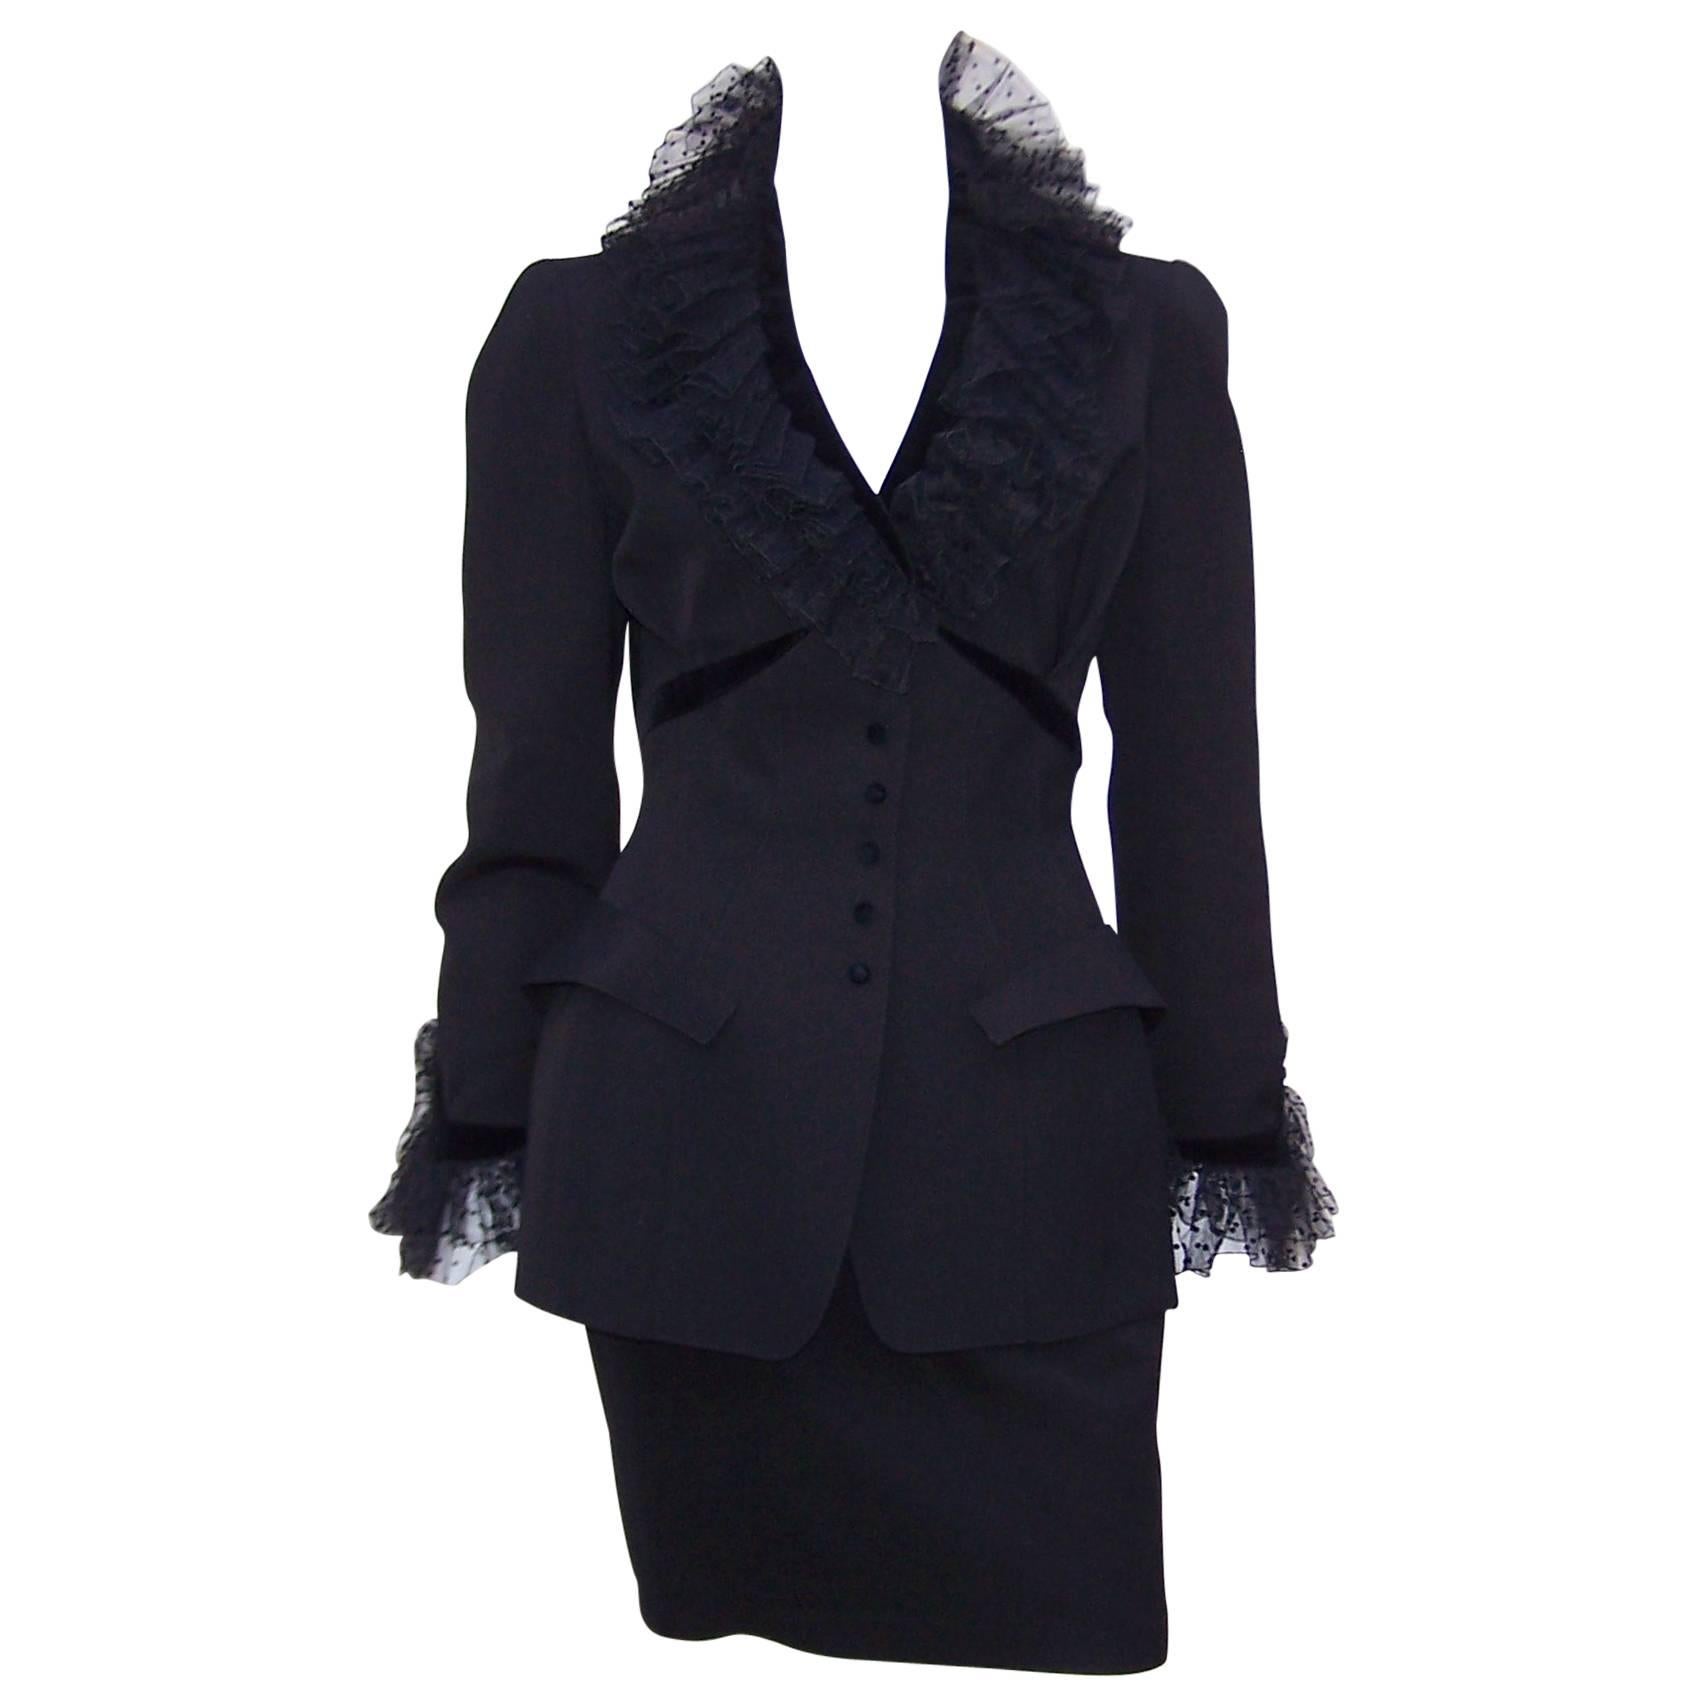 1980's Thierry Mugler Black Evening Suit With Velvet & Netting Details